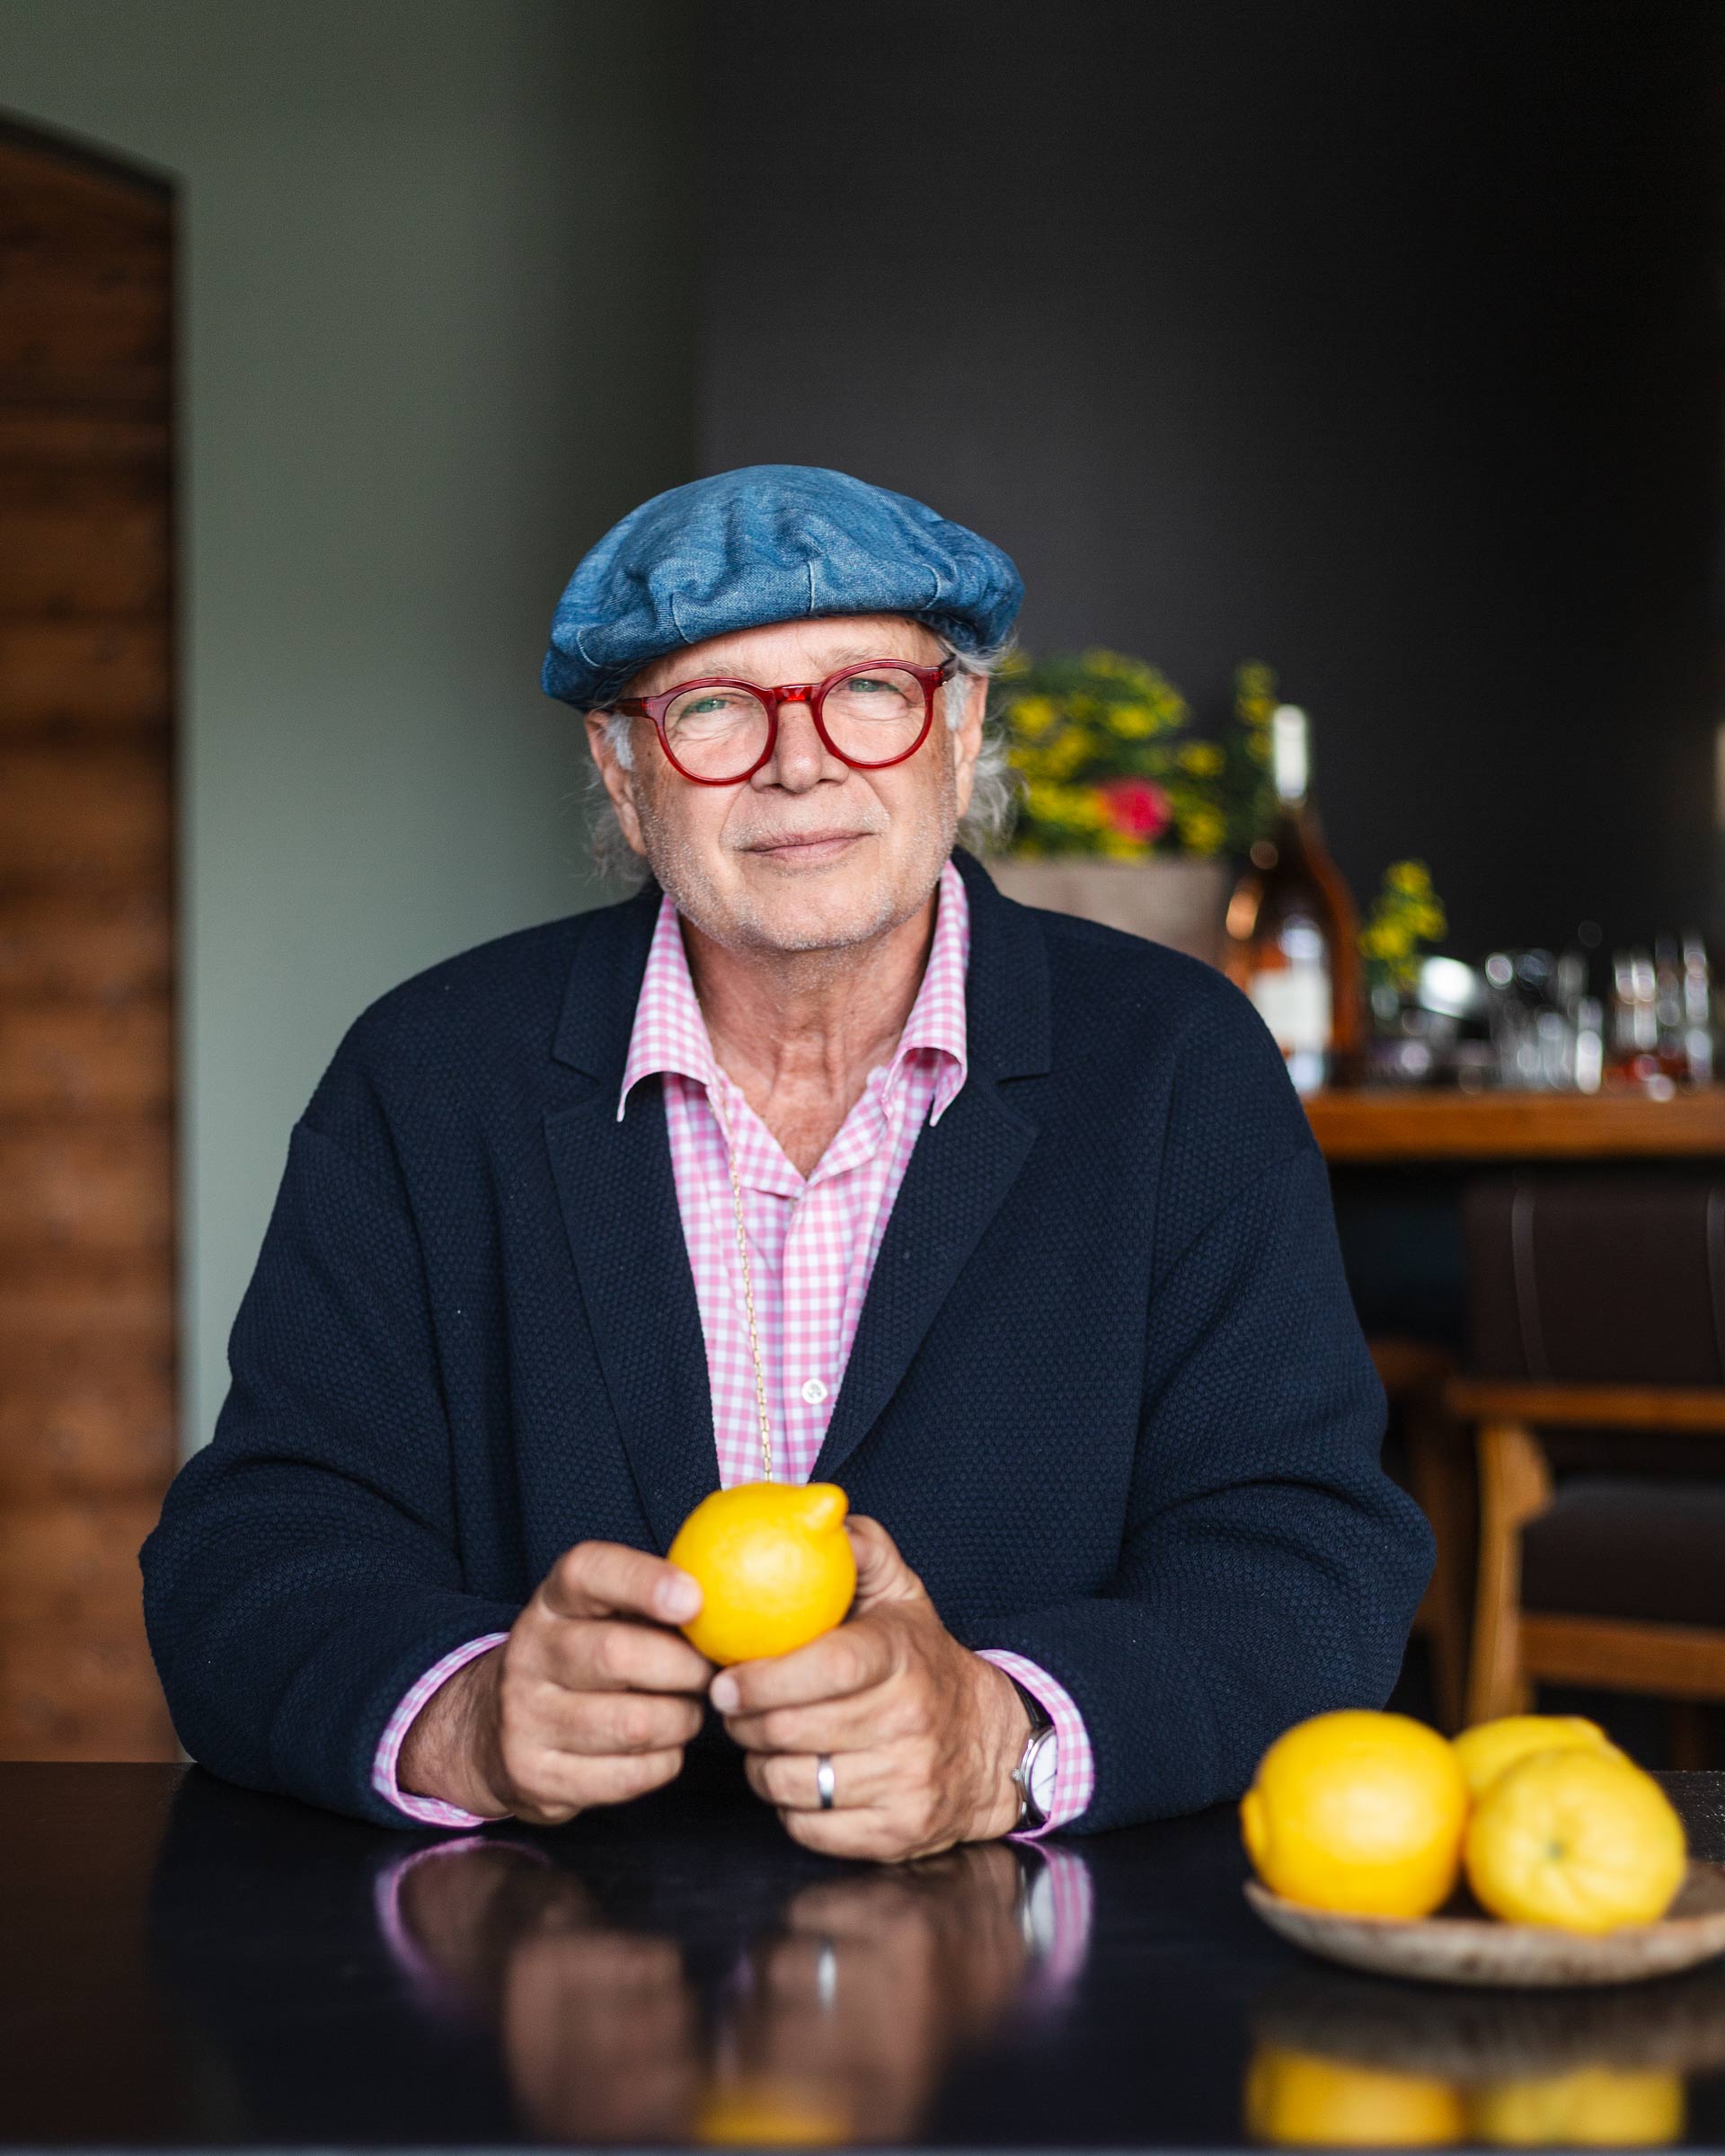 Portrait of a man in a blue cap and red glasses, sitting at a table with lemons